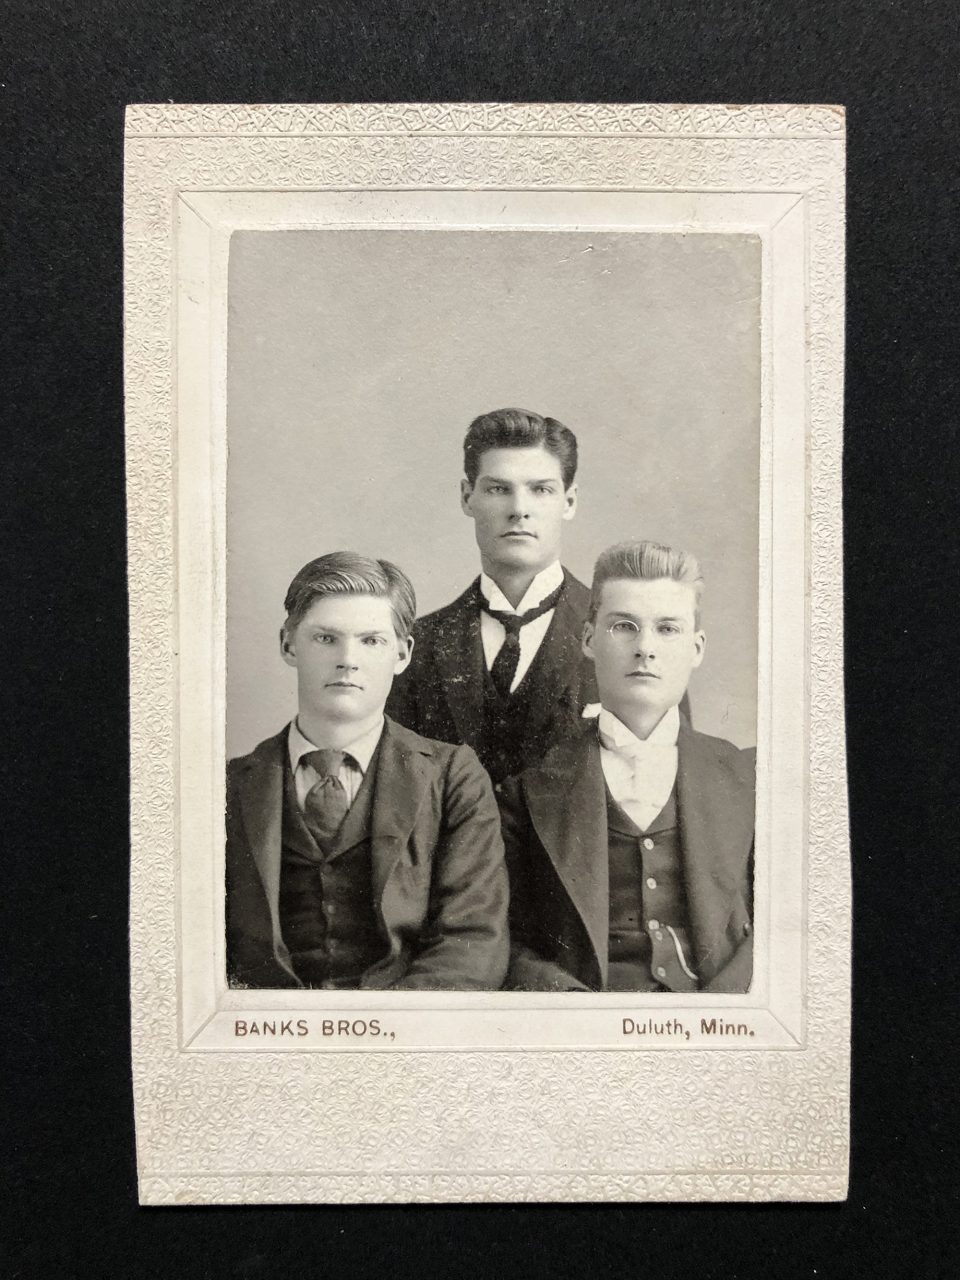 This gelatin silver Banks Brothers portrait of three young men is larger than a carte de visite and smaller than a cabinet card.